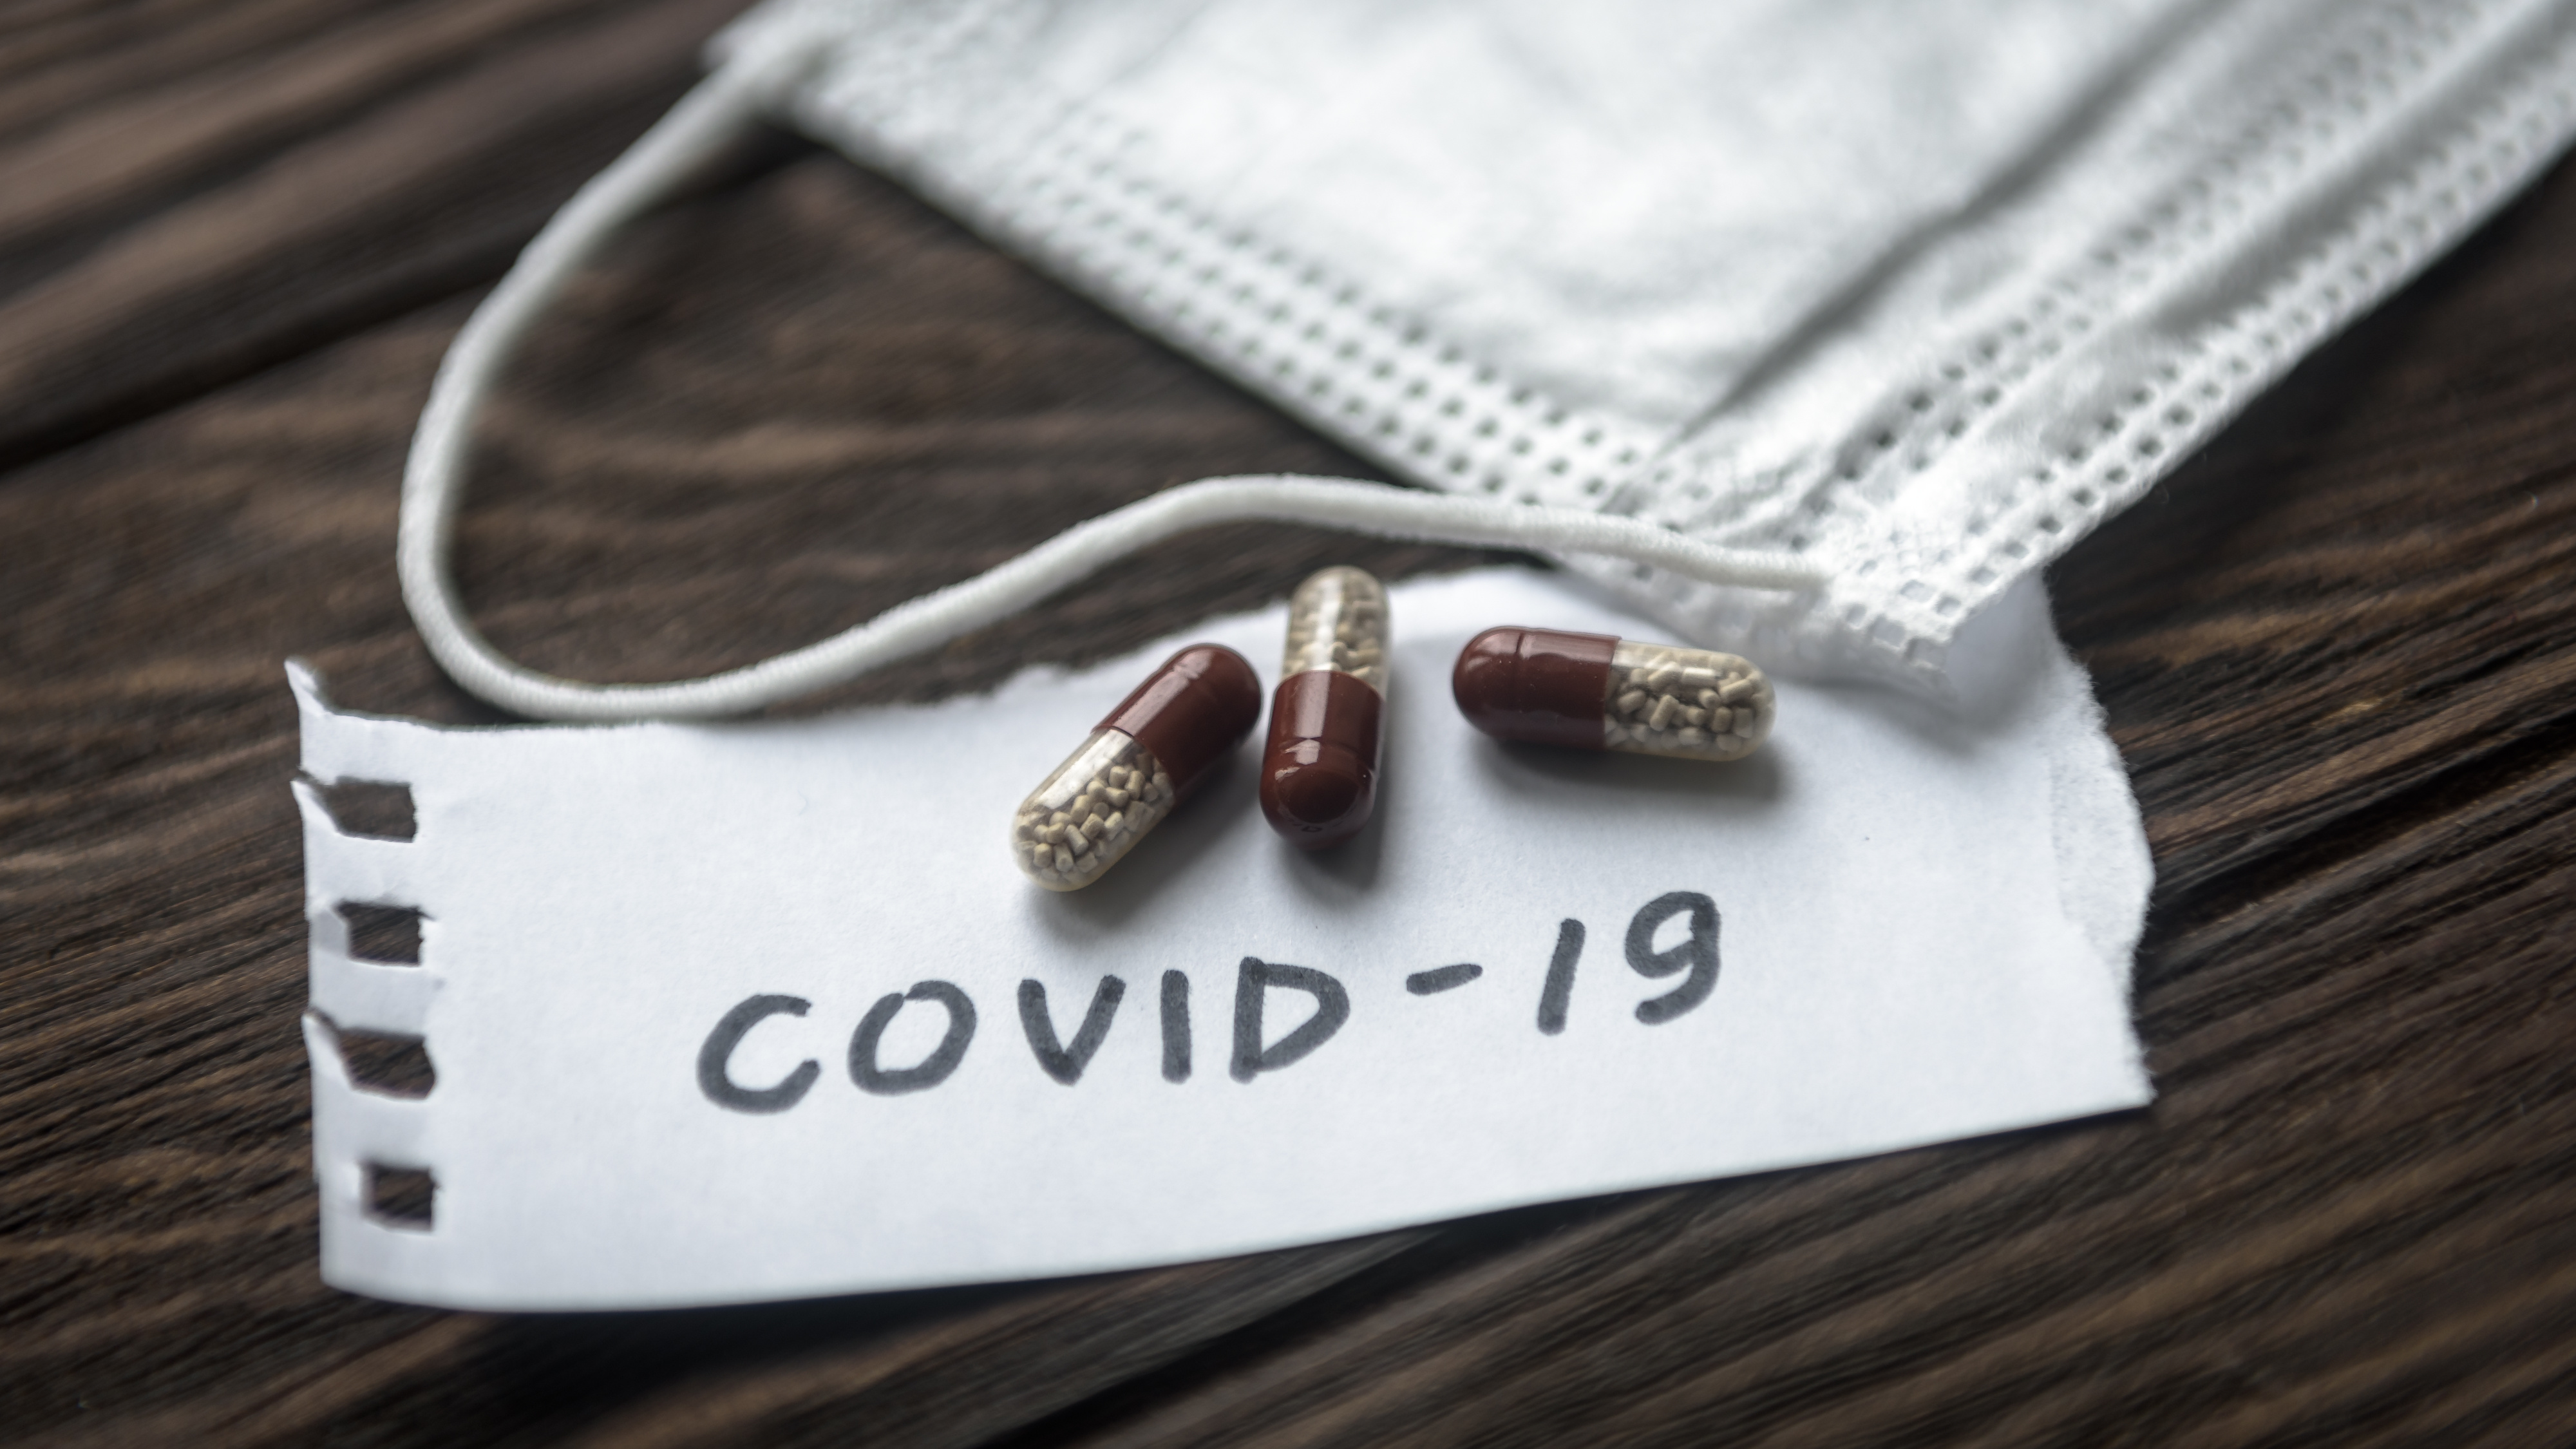 Use of Remdesivir to Potentially Treat COVID-19